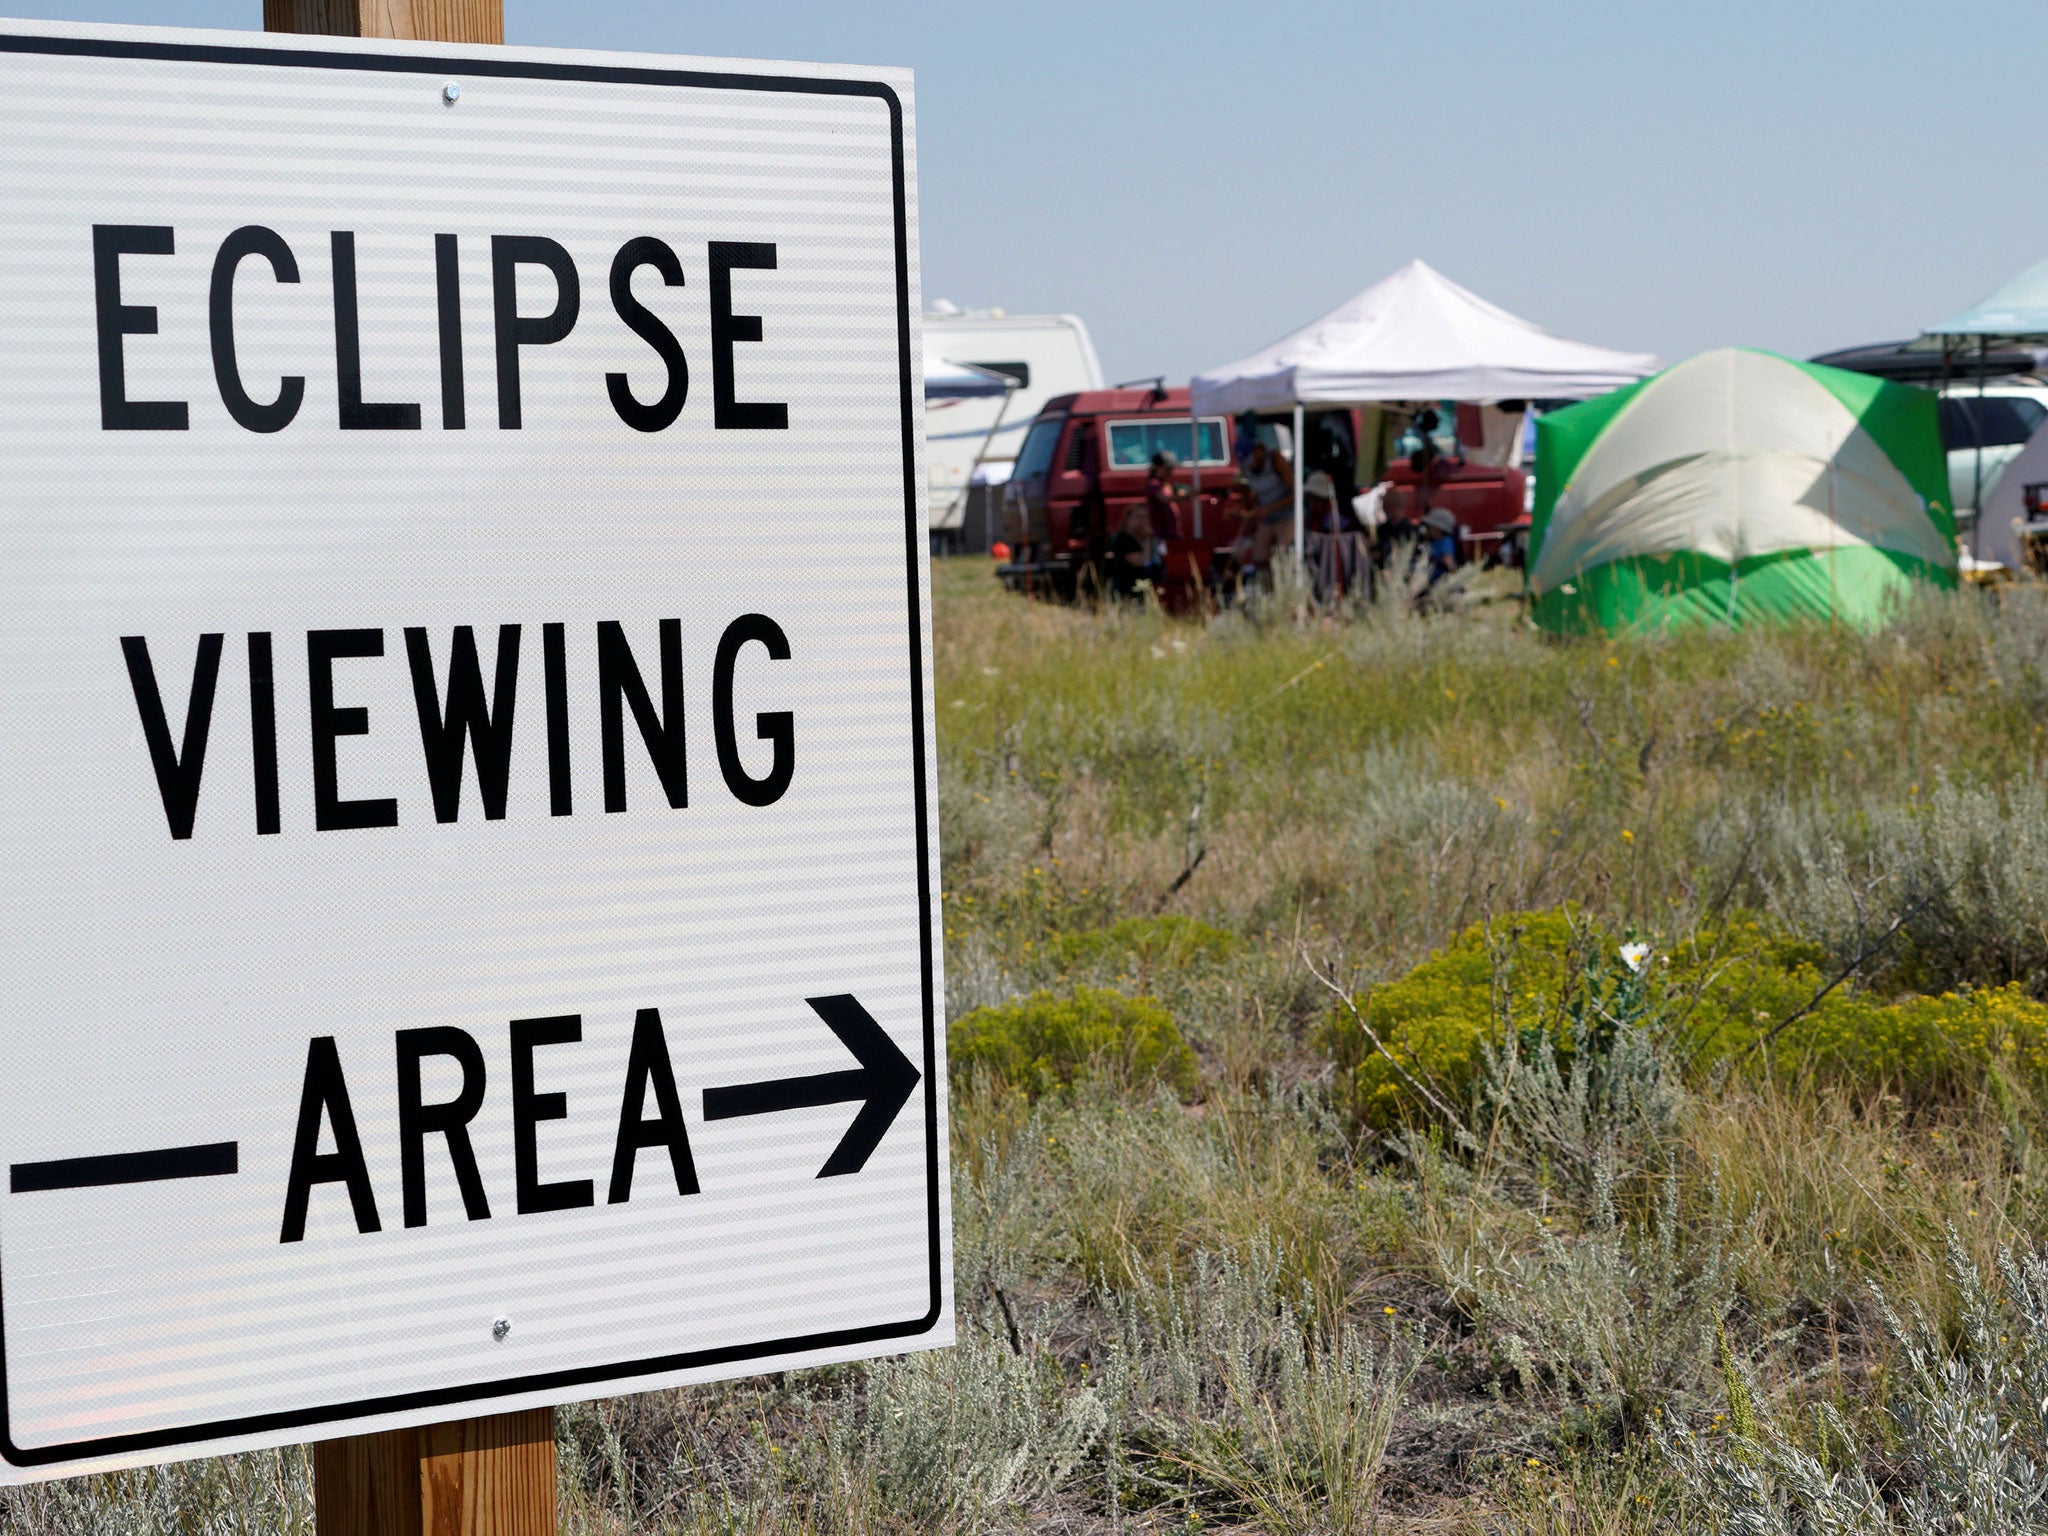 Small towns across America have seen thousands of tourists converge upon them, desperate for a good view of the eclipse